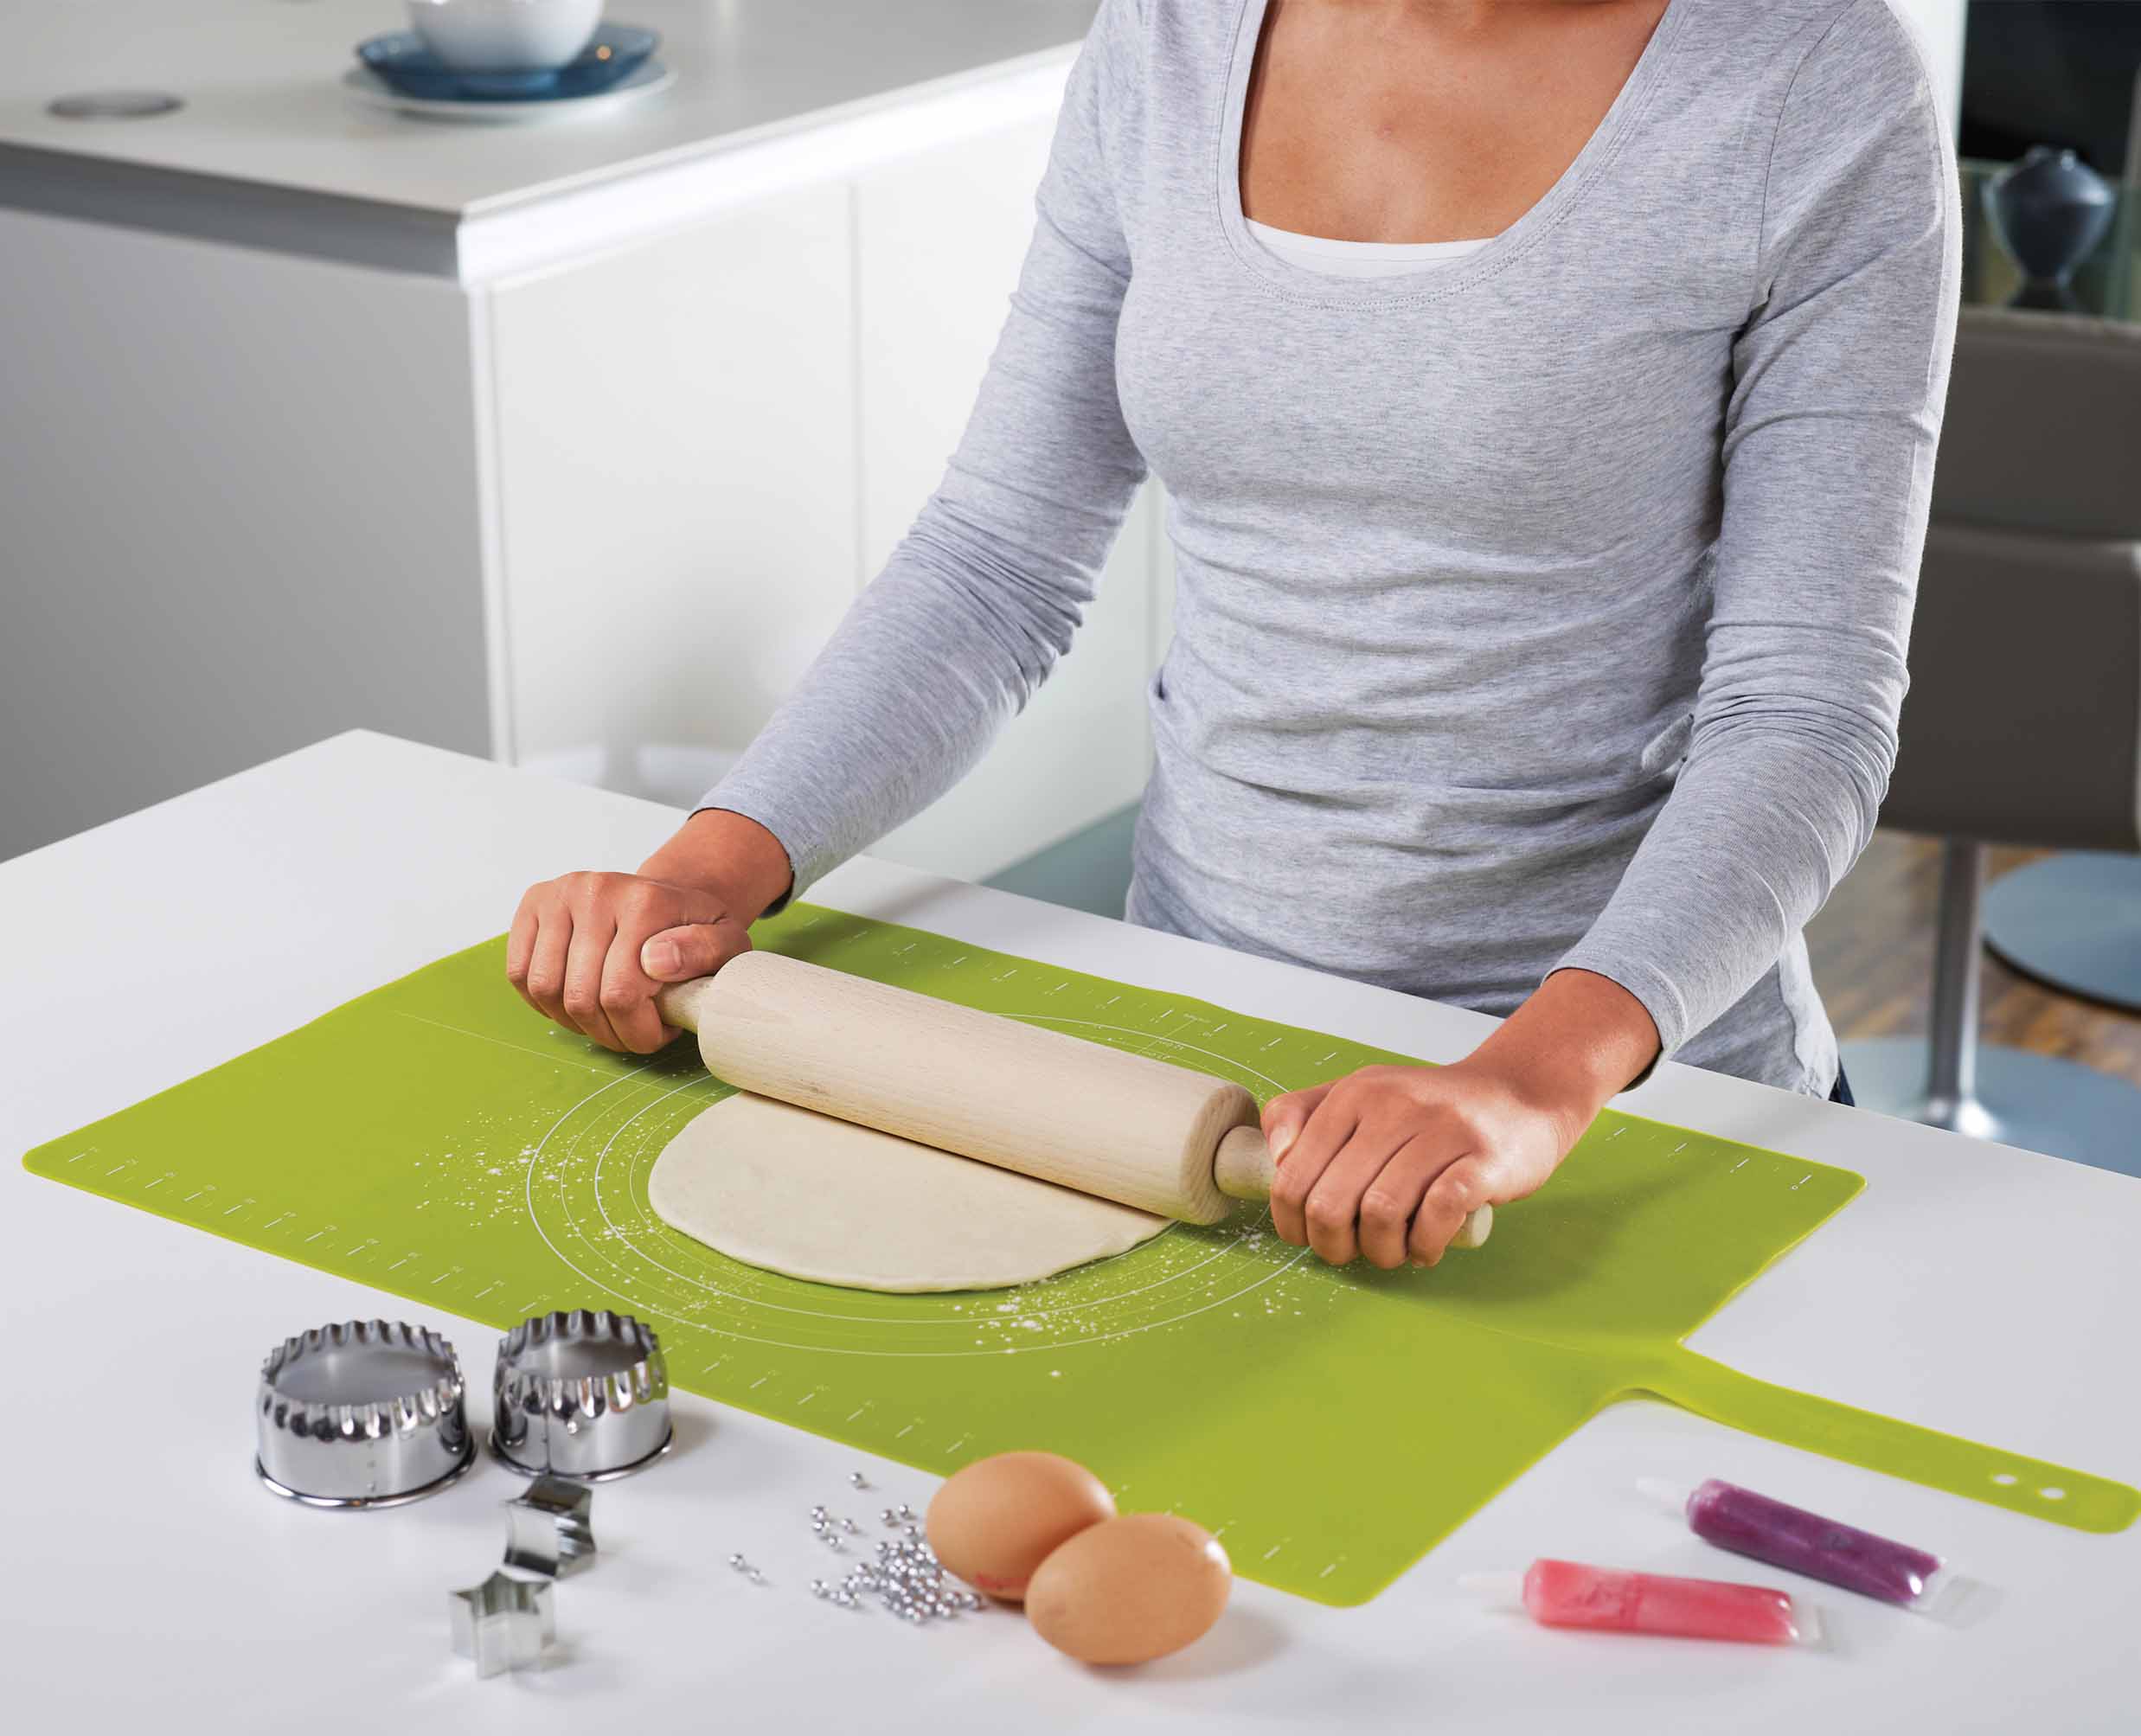 Roll-Up™ Silicone Pastry Mat - 20031 - Image 3